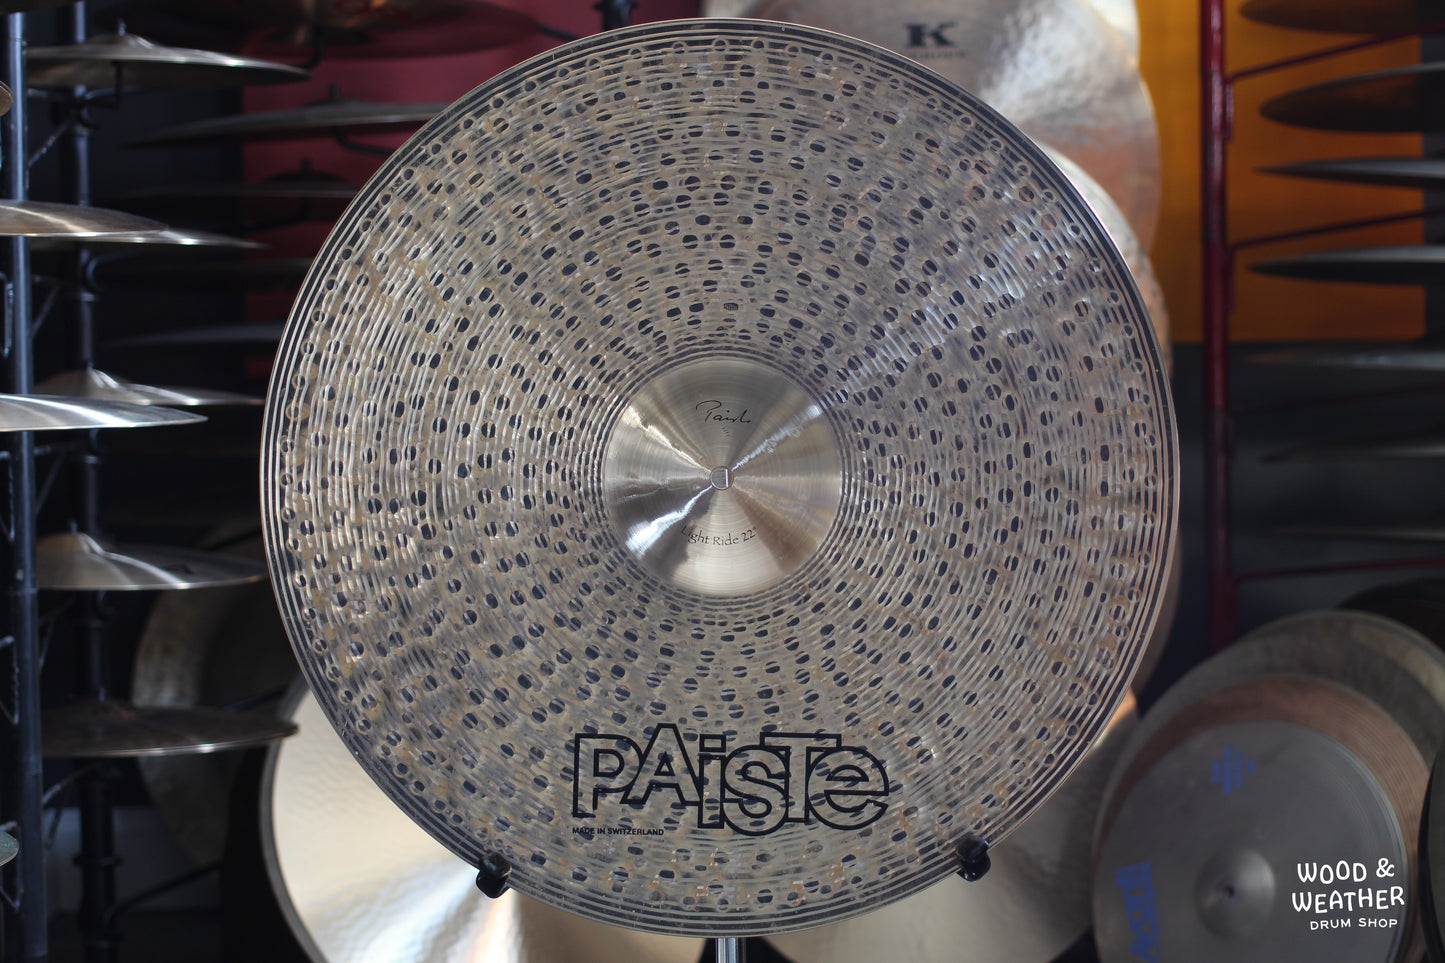 Paiste 22" Signature Traditionals Light Ride Cymbal 2560g